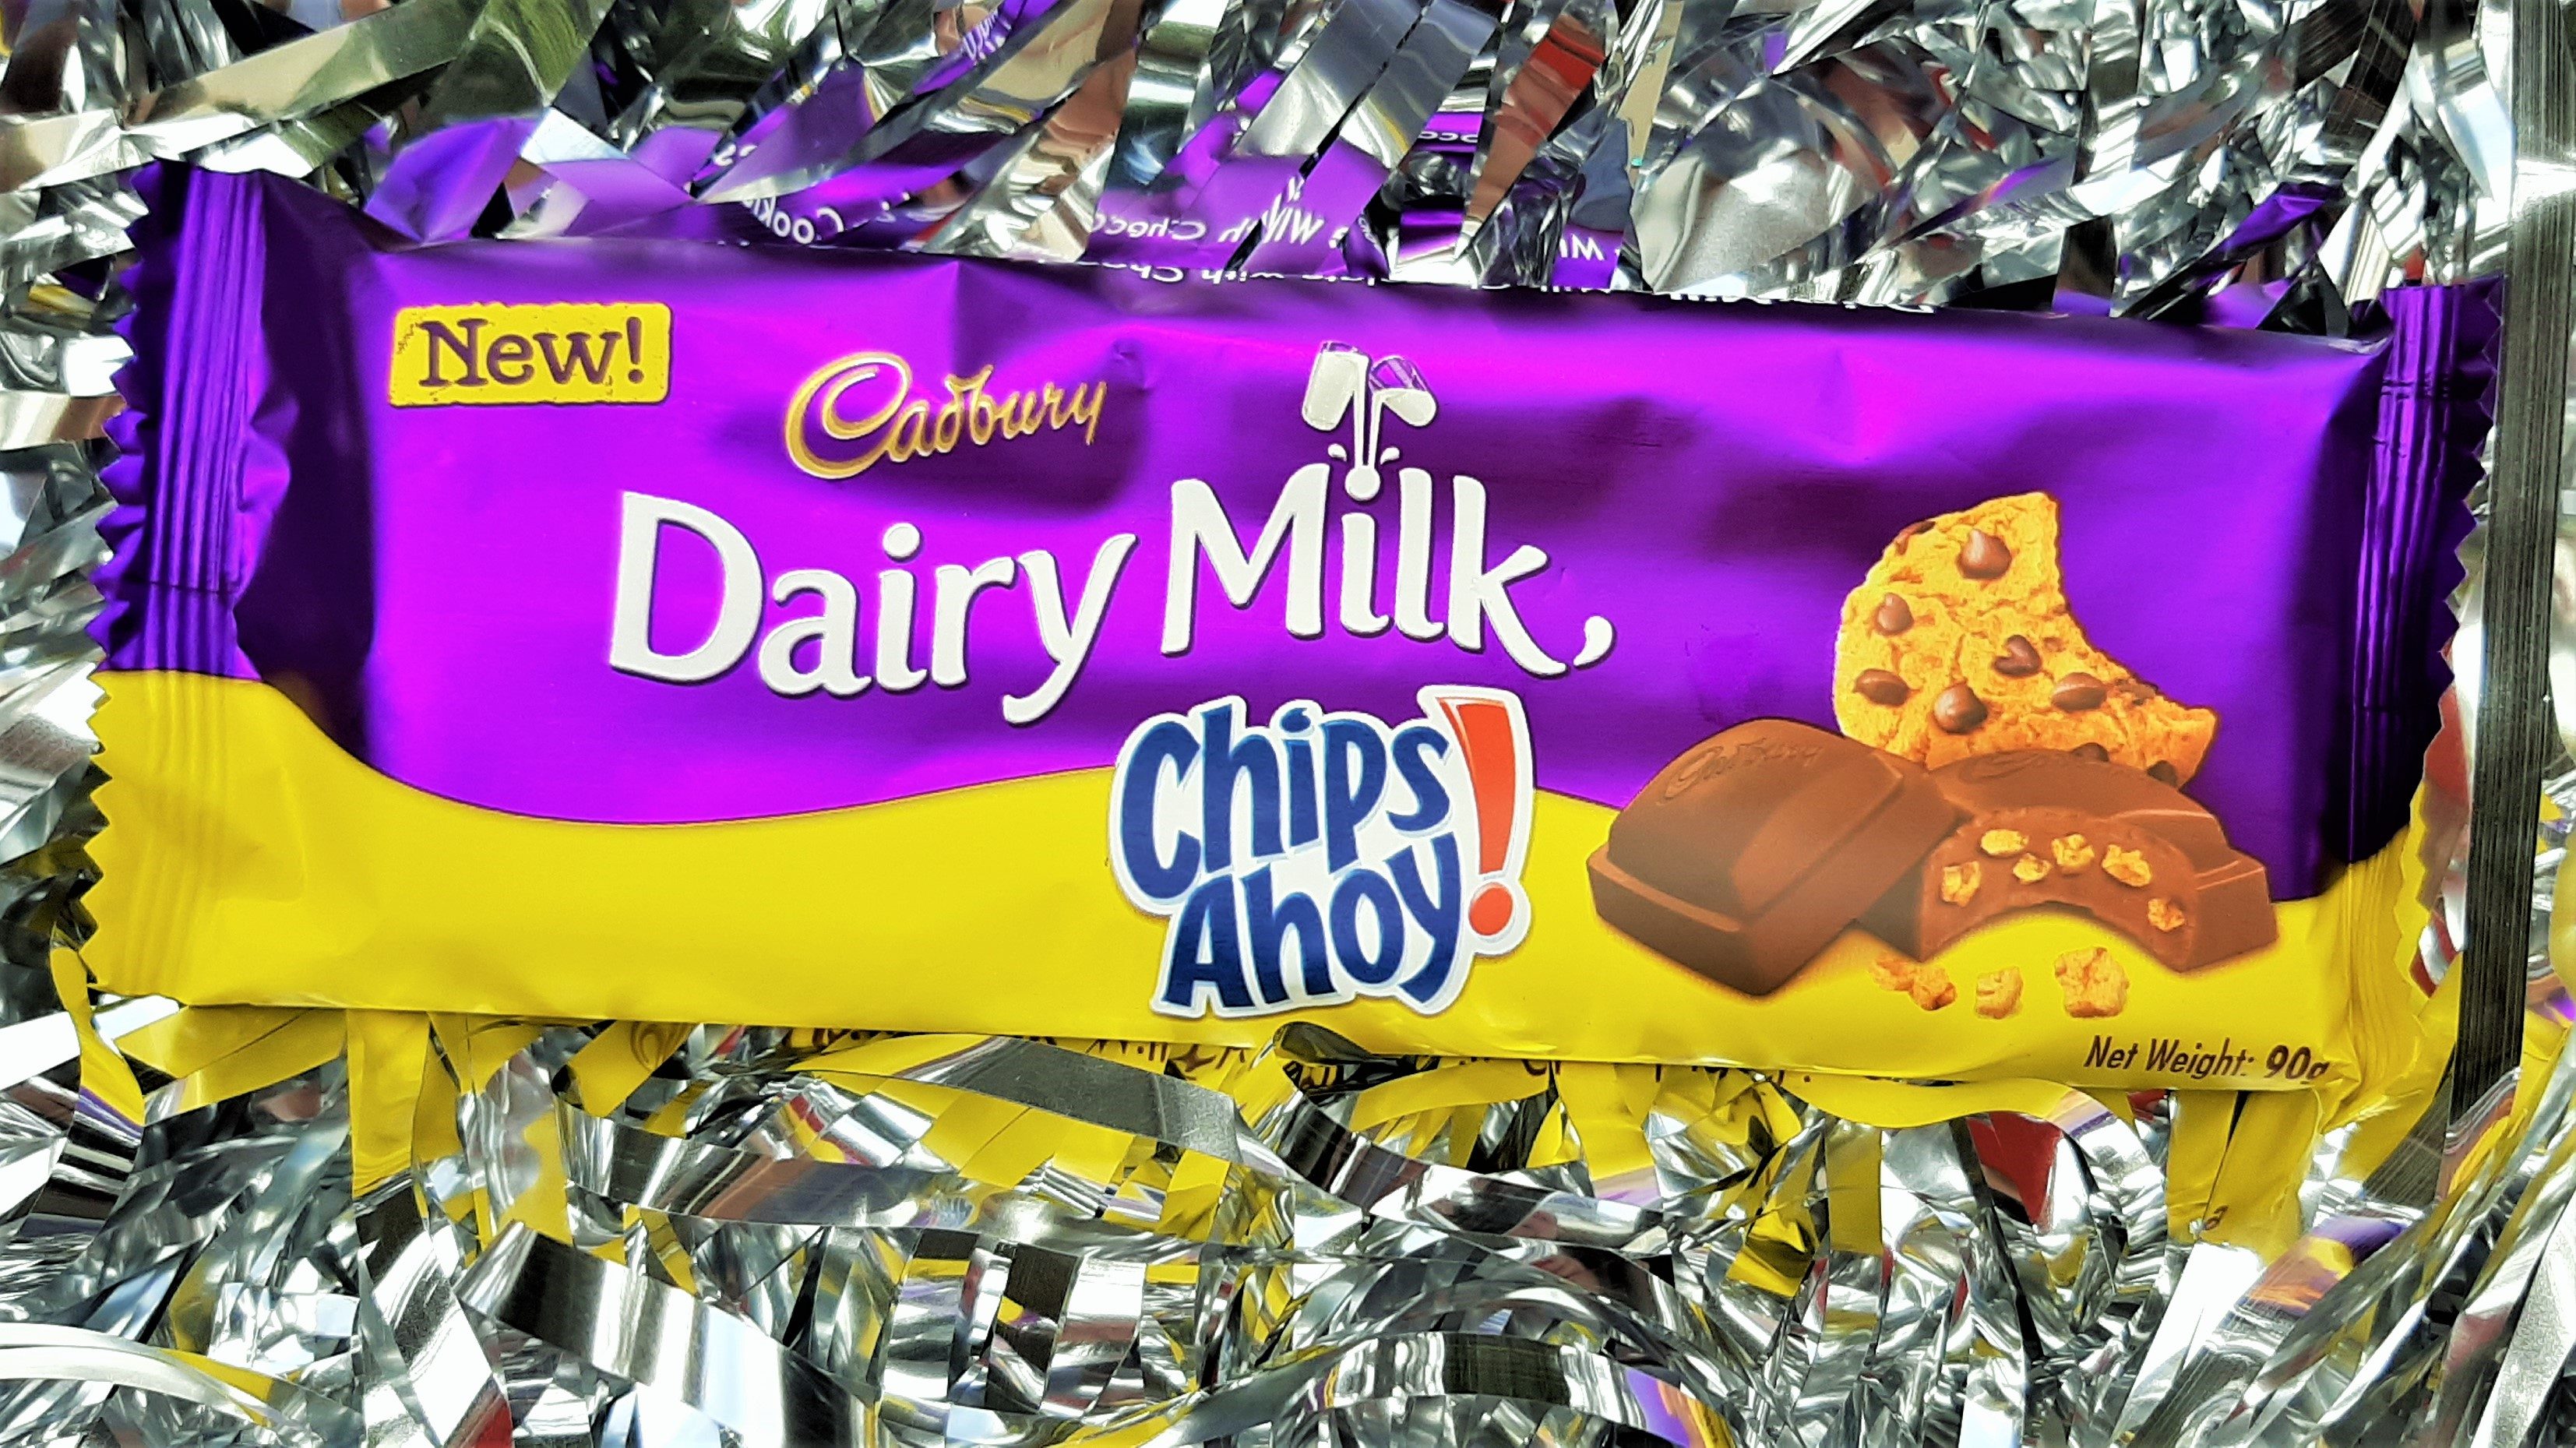 Cadbury meets Chips Ahoy! in this new candy bar